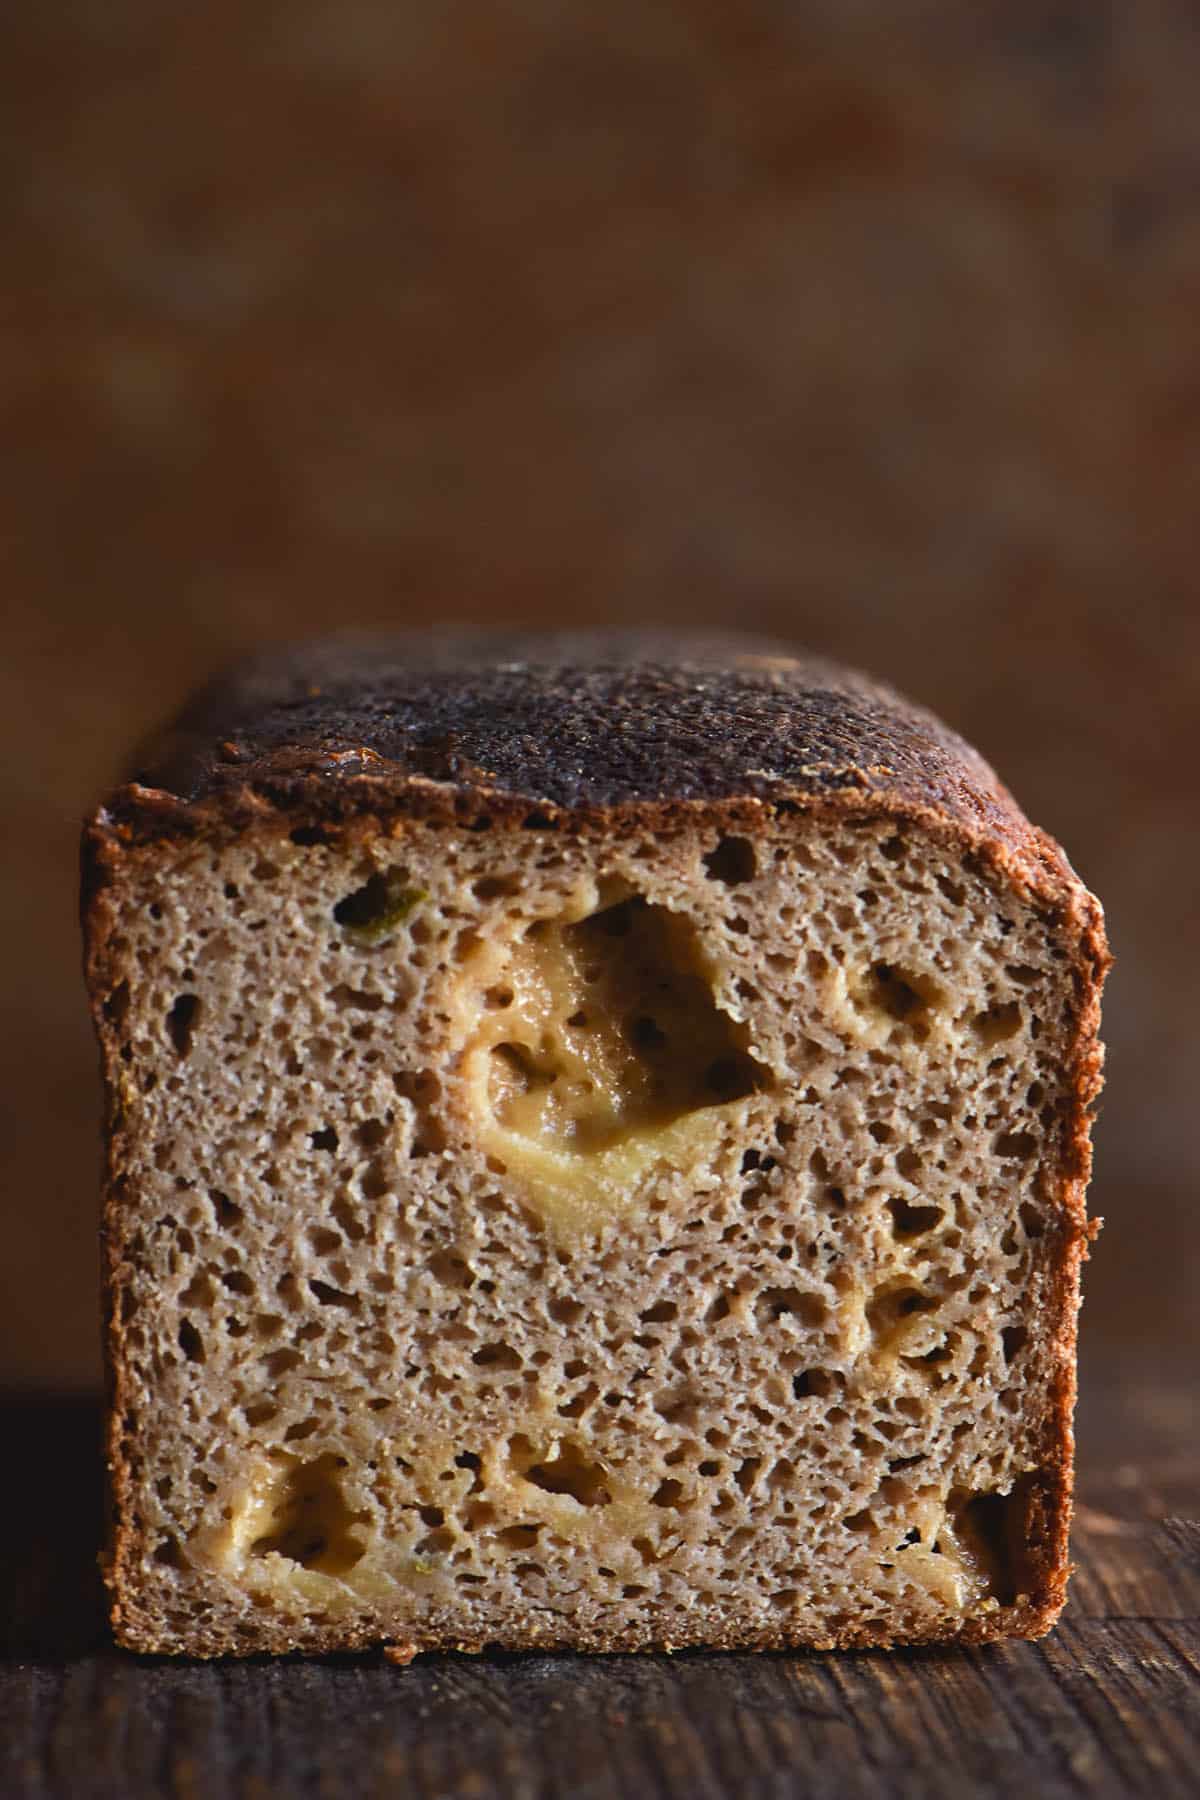 A side on view of the crumb of a gluten free sourdough jalapeno and cheddar loaf. Melty cheddar holes and bits of jalapeno are interspersed with the crumb of the loaf. The bread sits on a wooden table with a dark background